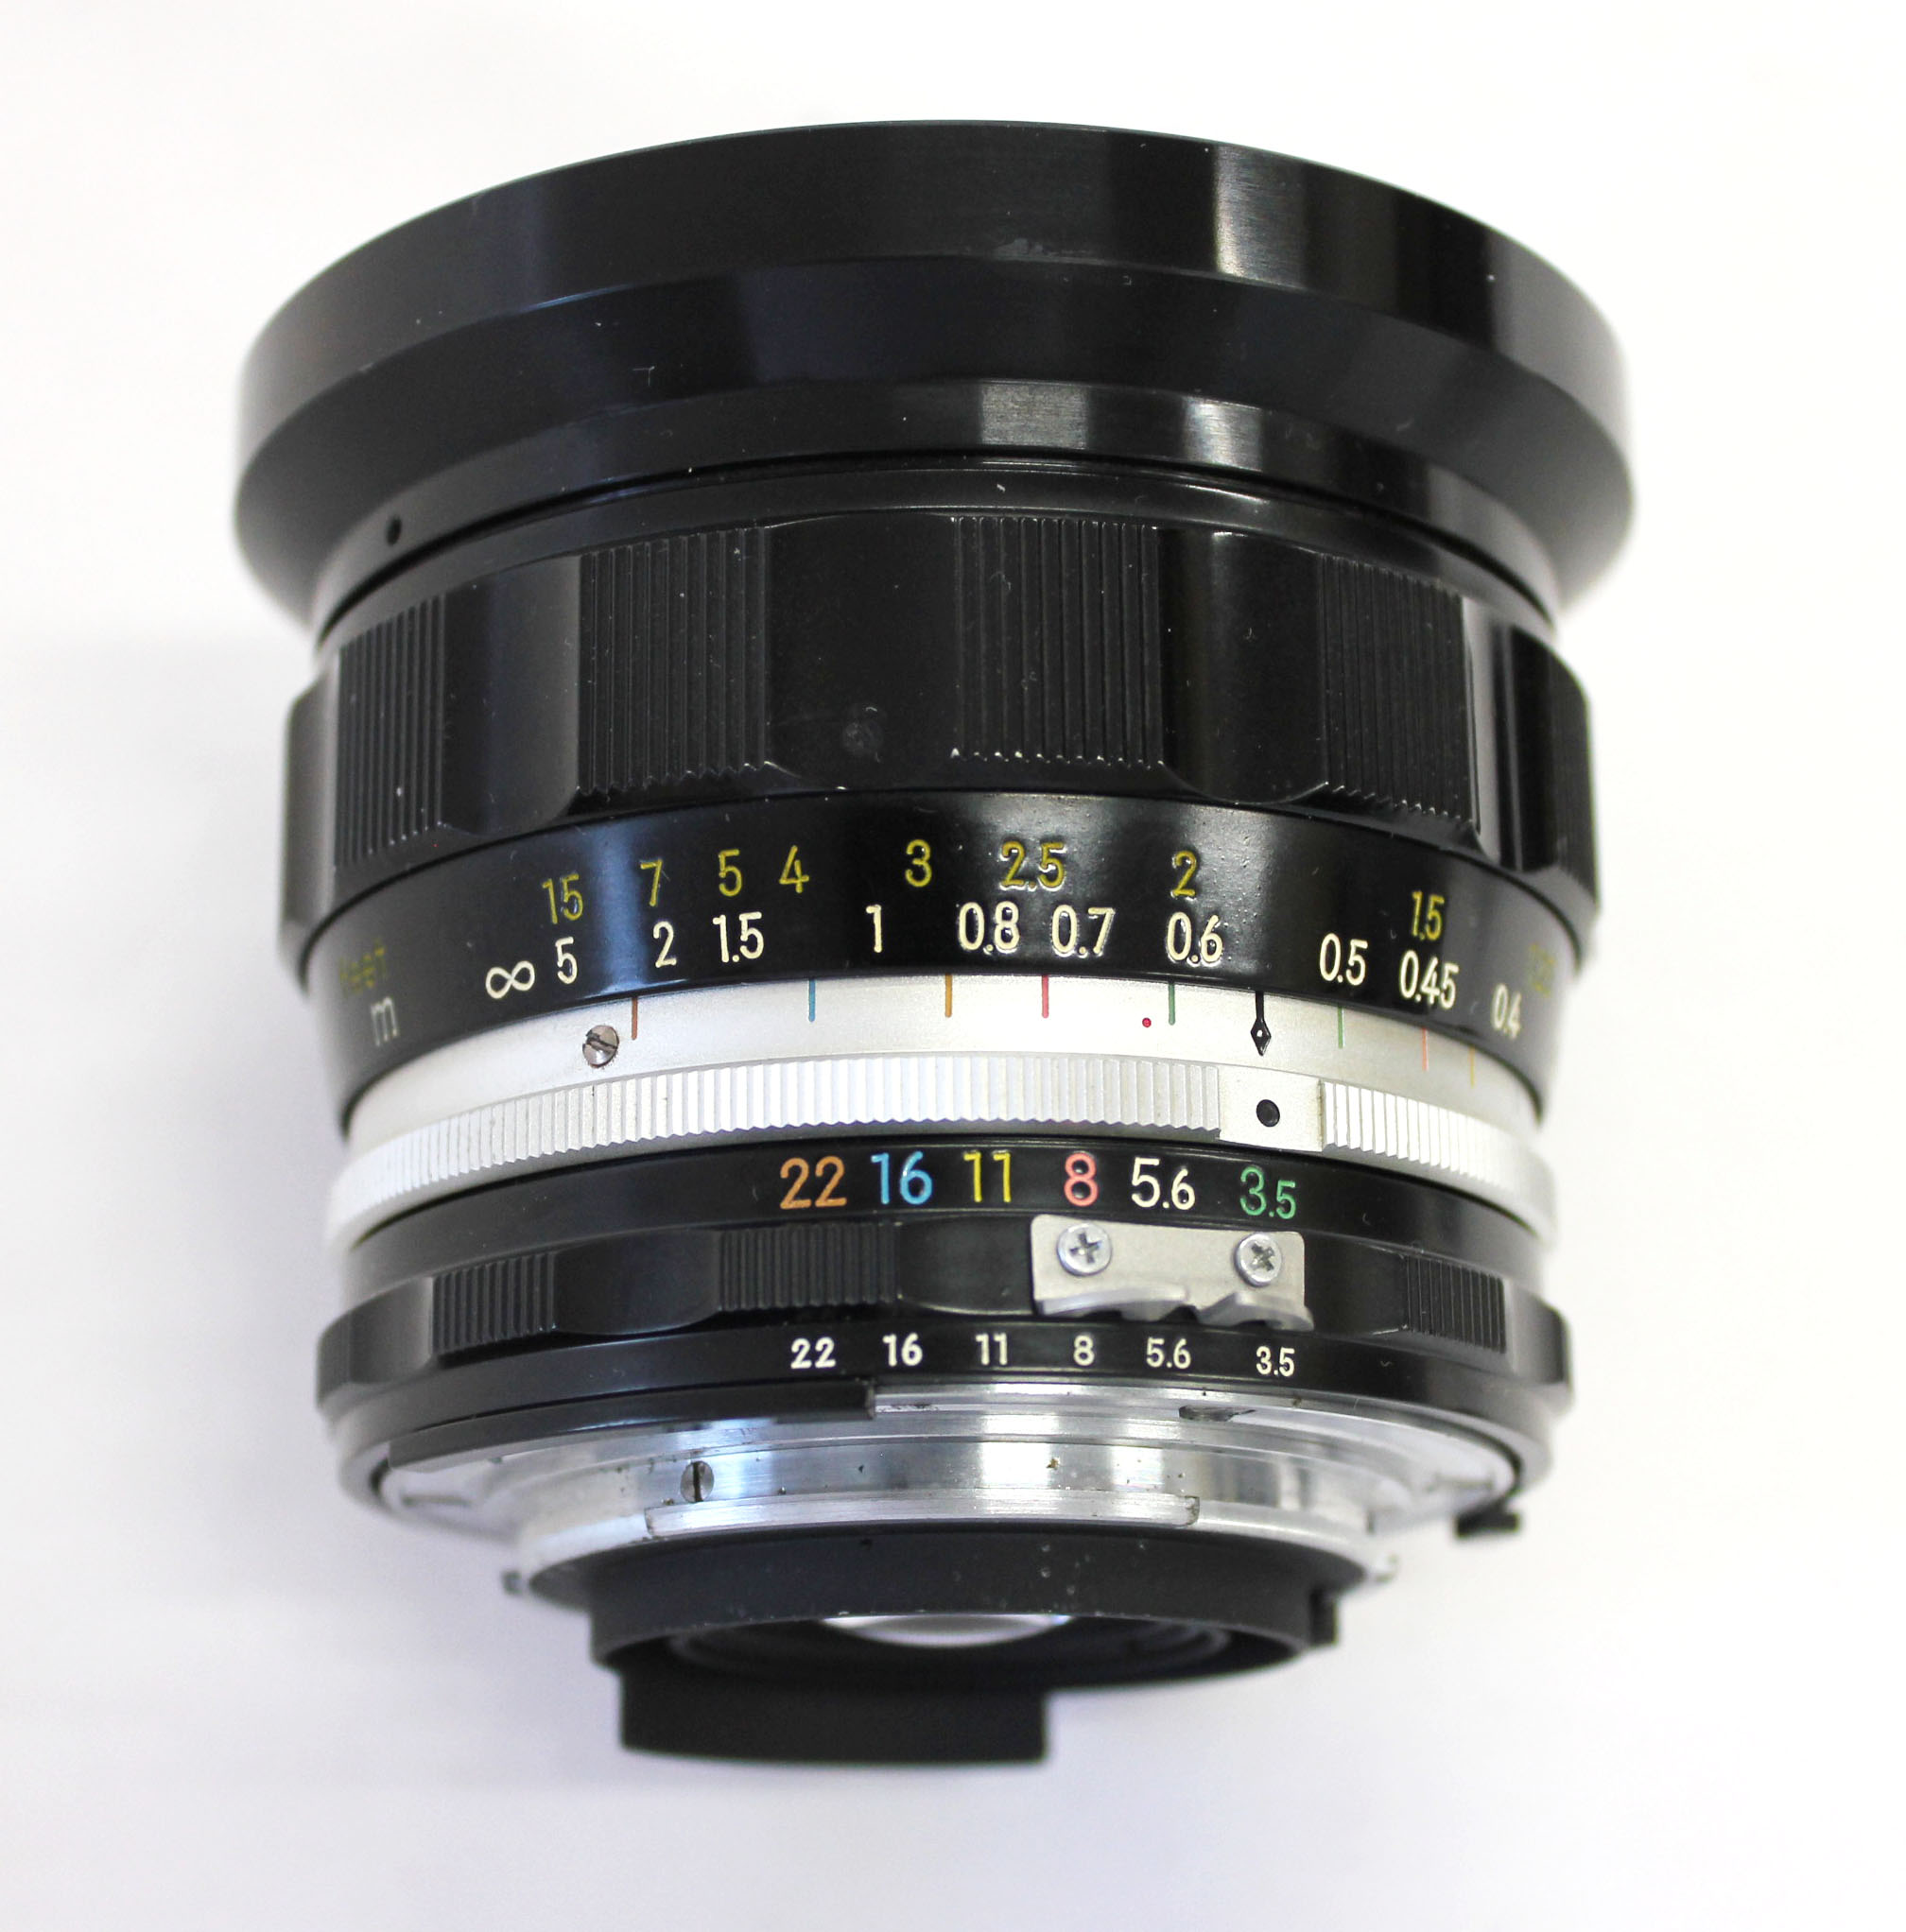 Nikon Nikkor-UD Auto 20mm F/3.5 Ai Converted MF Wide Angle Lens from